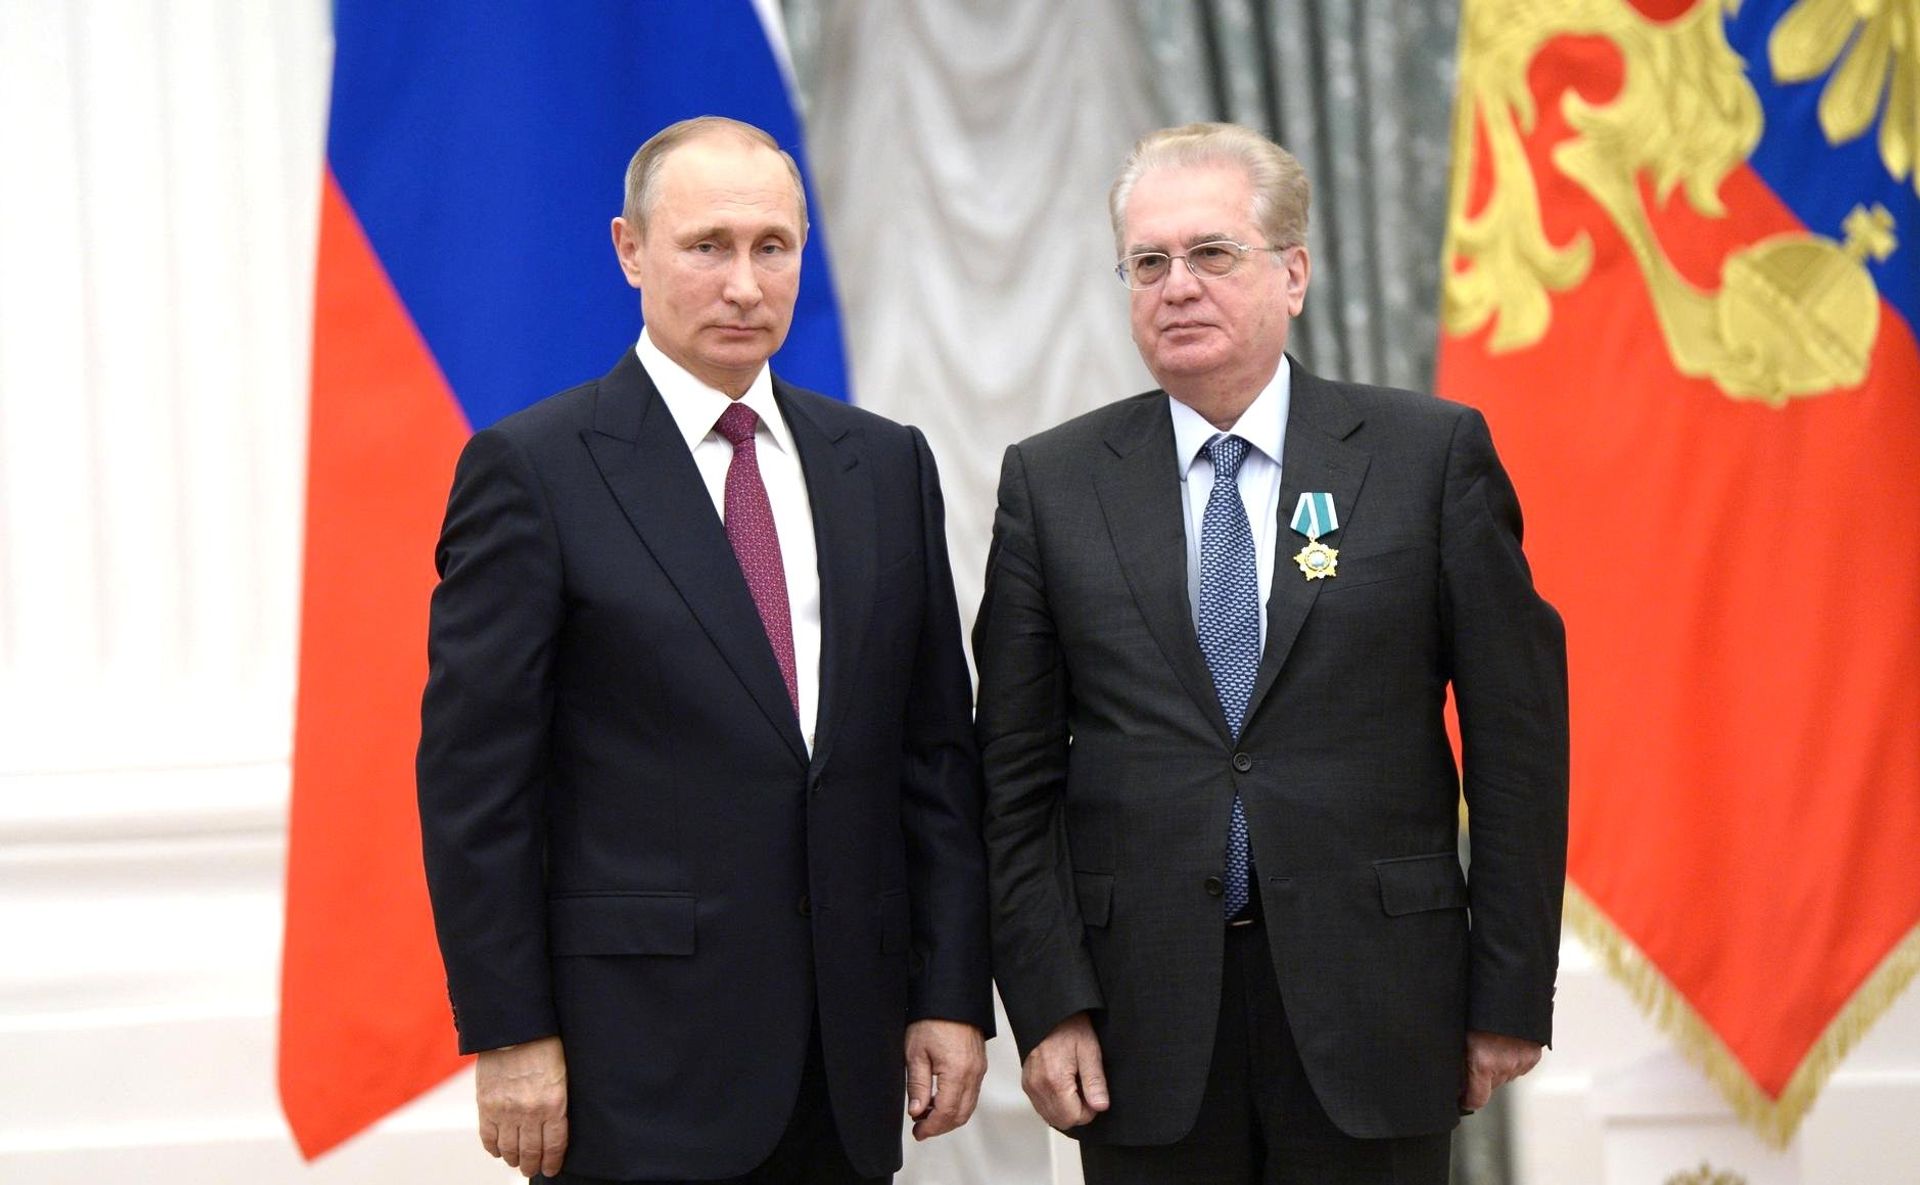 Mikhail Piotrovsky, the director of the State Hermitage Museum, is awarded the Order of Friendship by President Vladimir Putin in 2016 courtesy The Kremlin